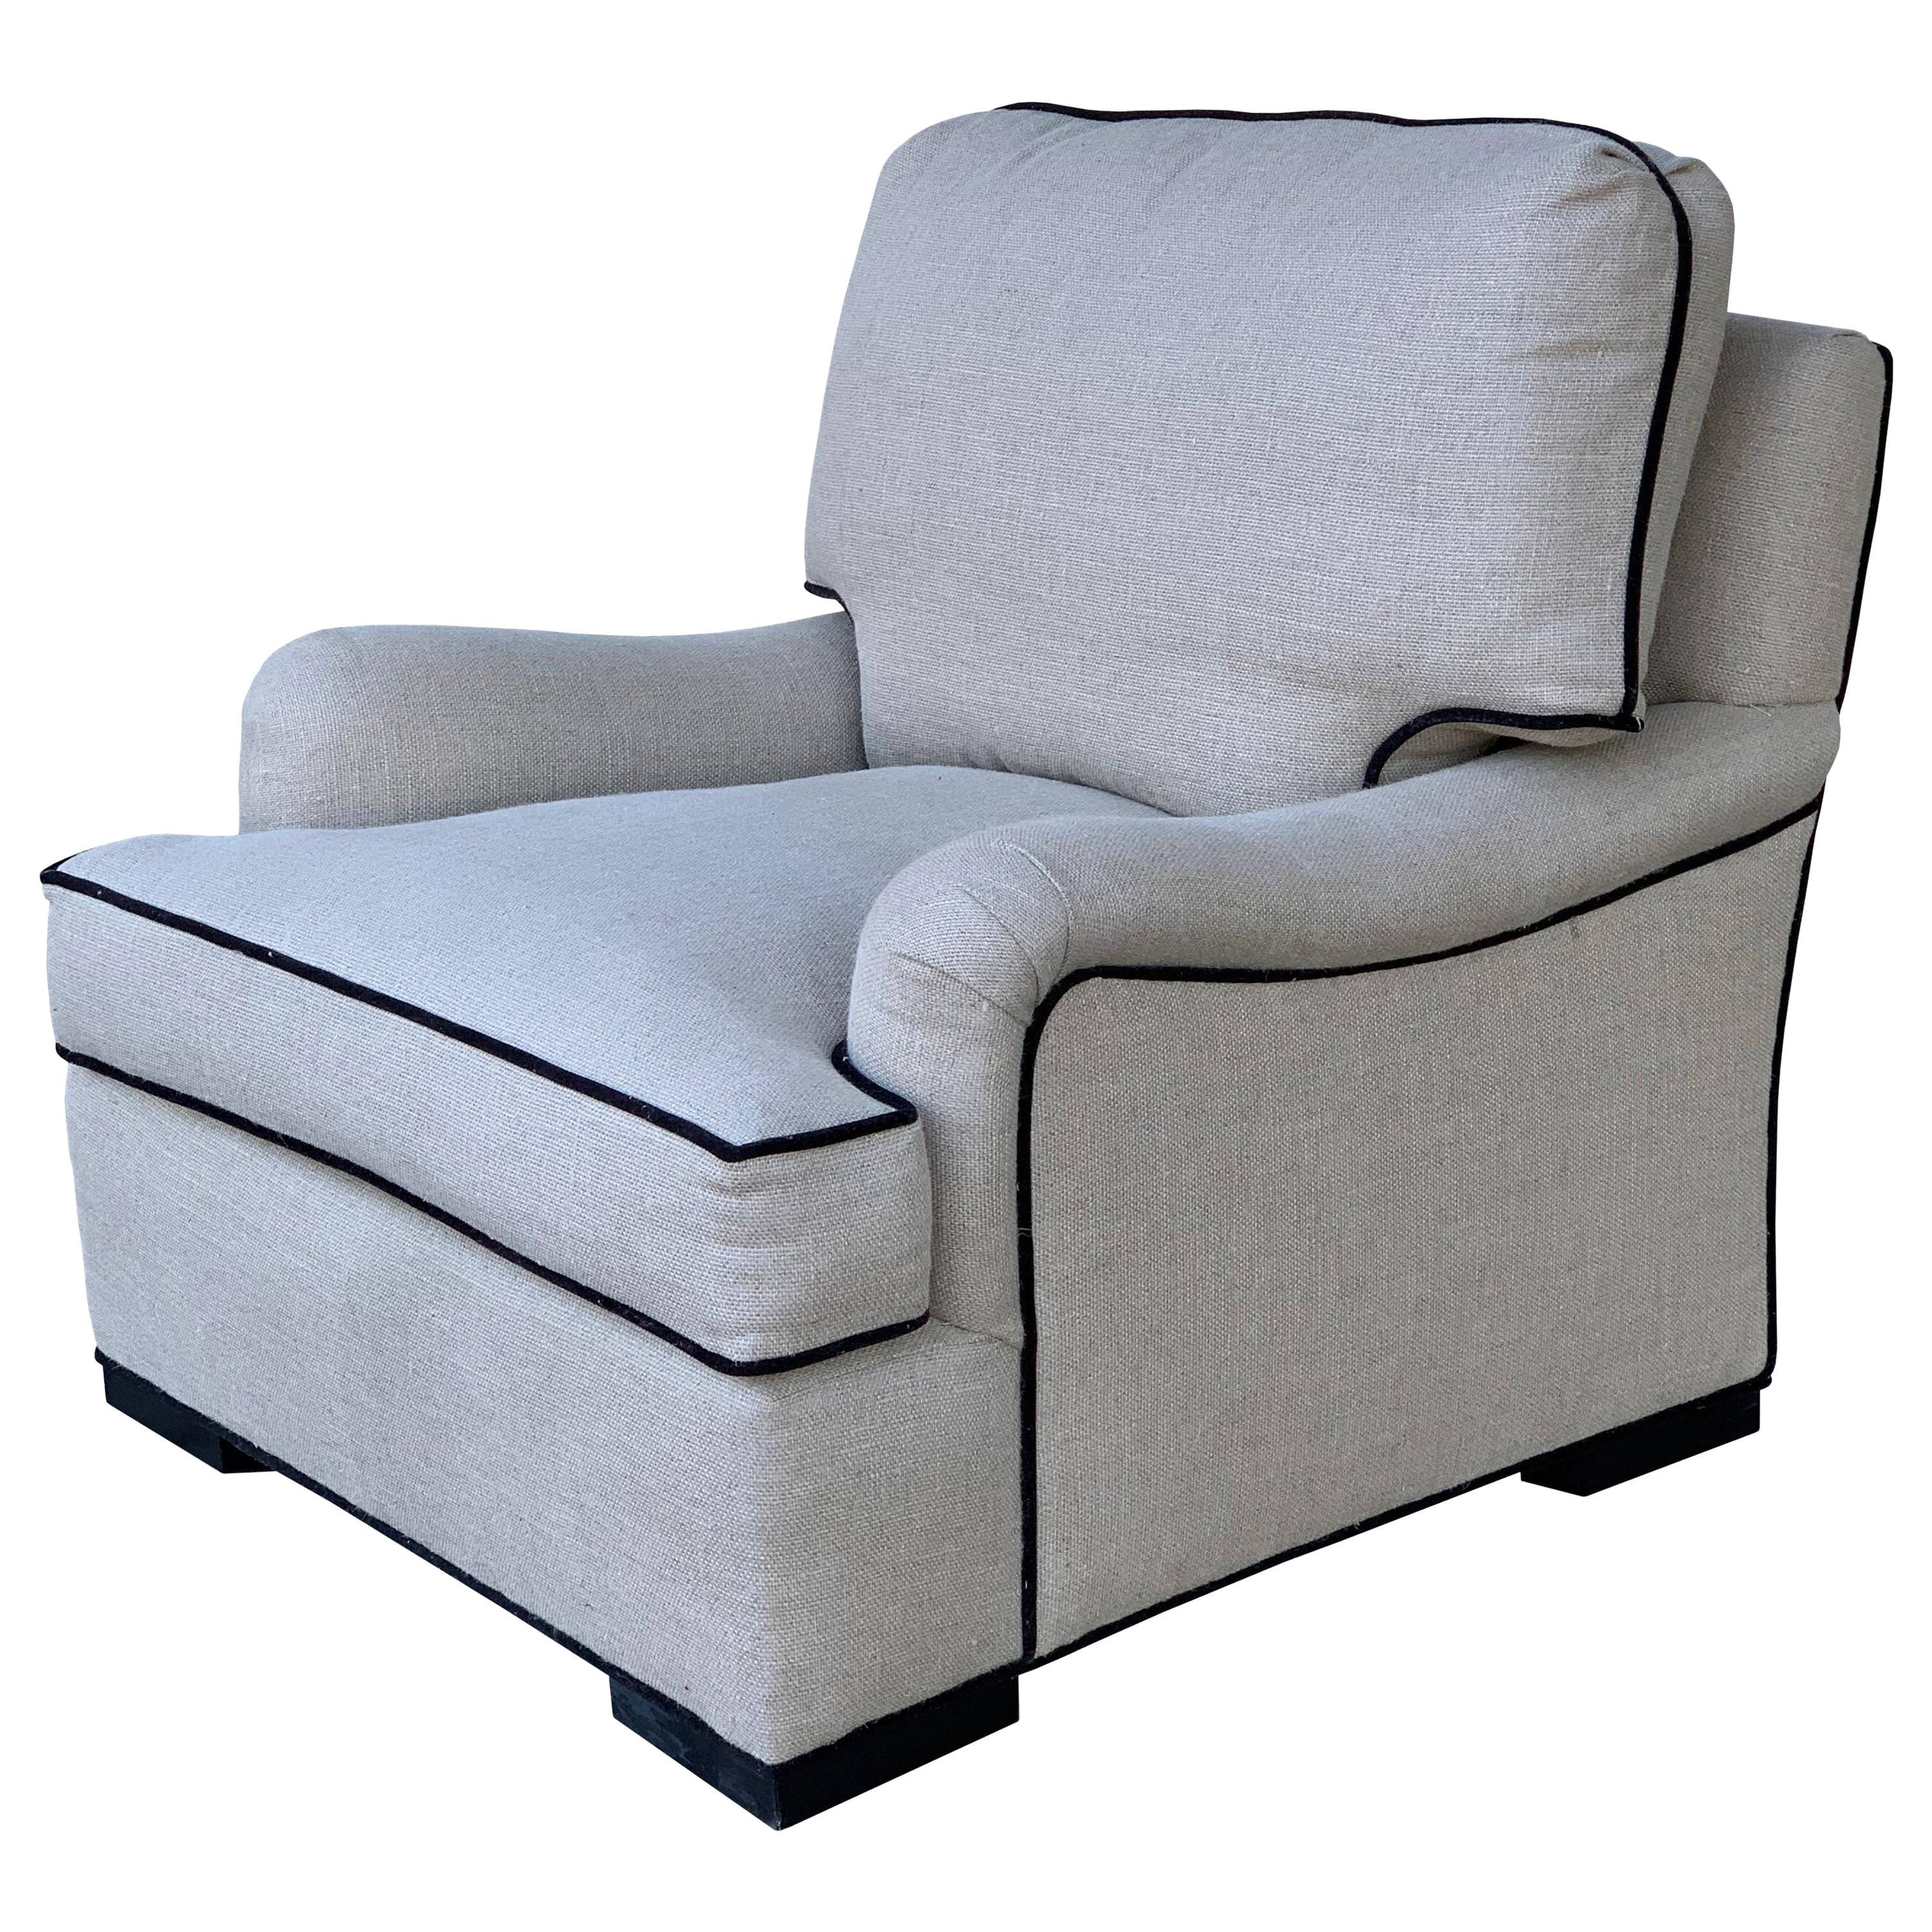 Beautiful Oversize Armchair in Cream Cotton Mix Upholstery